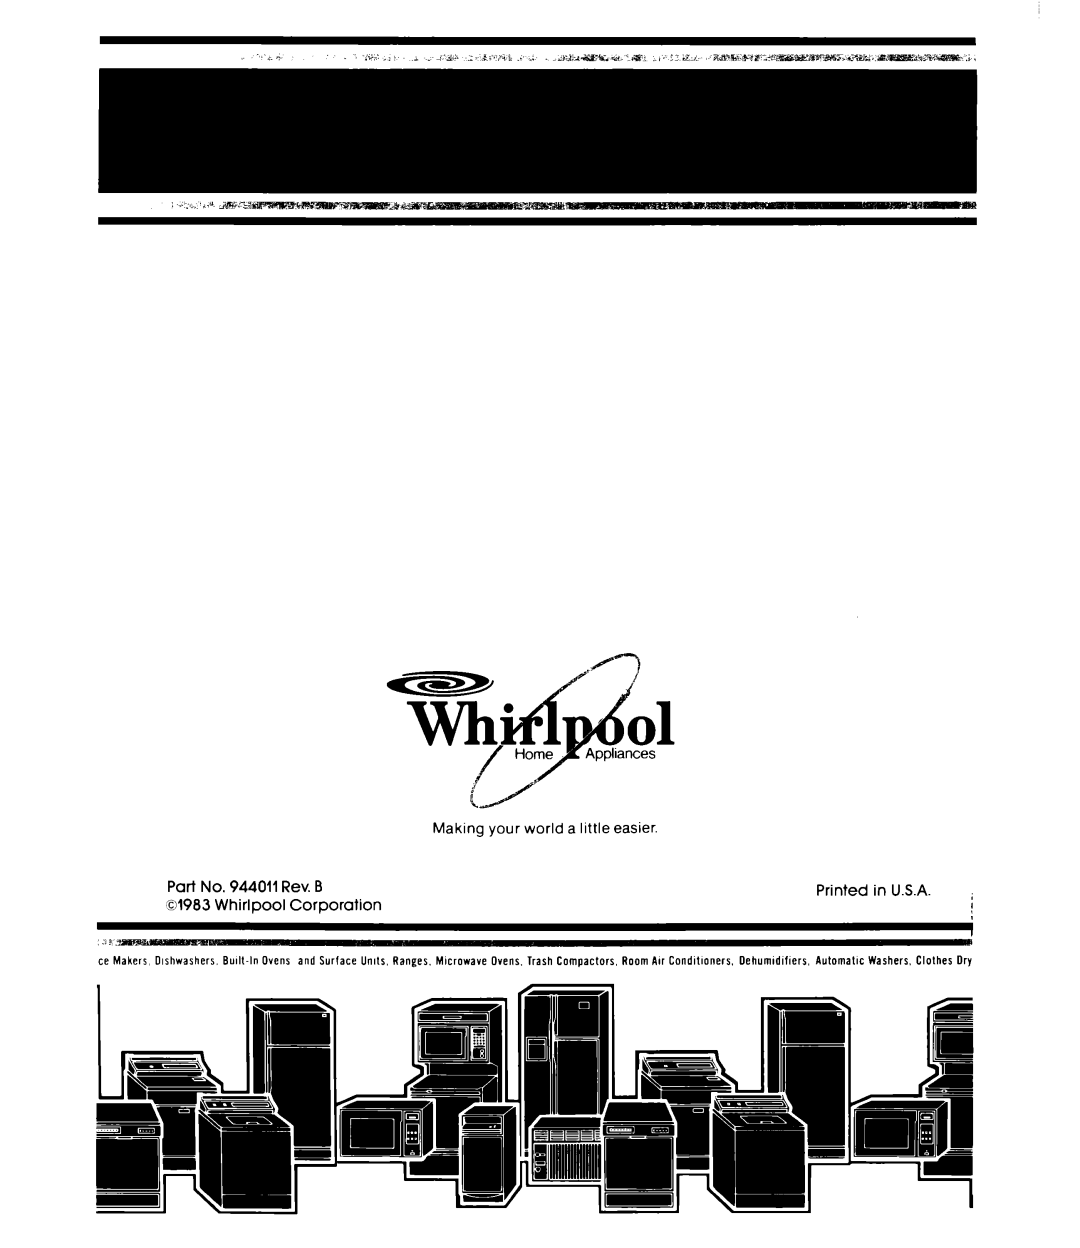 Whirlpool ED26MM manual Making your world a little easier, Part No. 944011 Rev. B, Whirlpool Corporation 